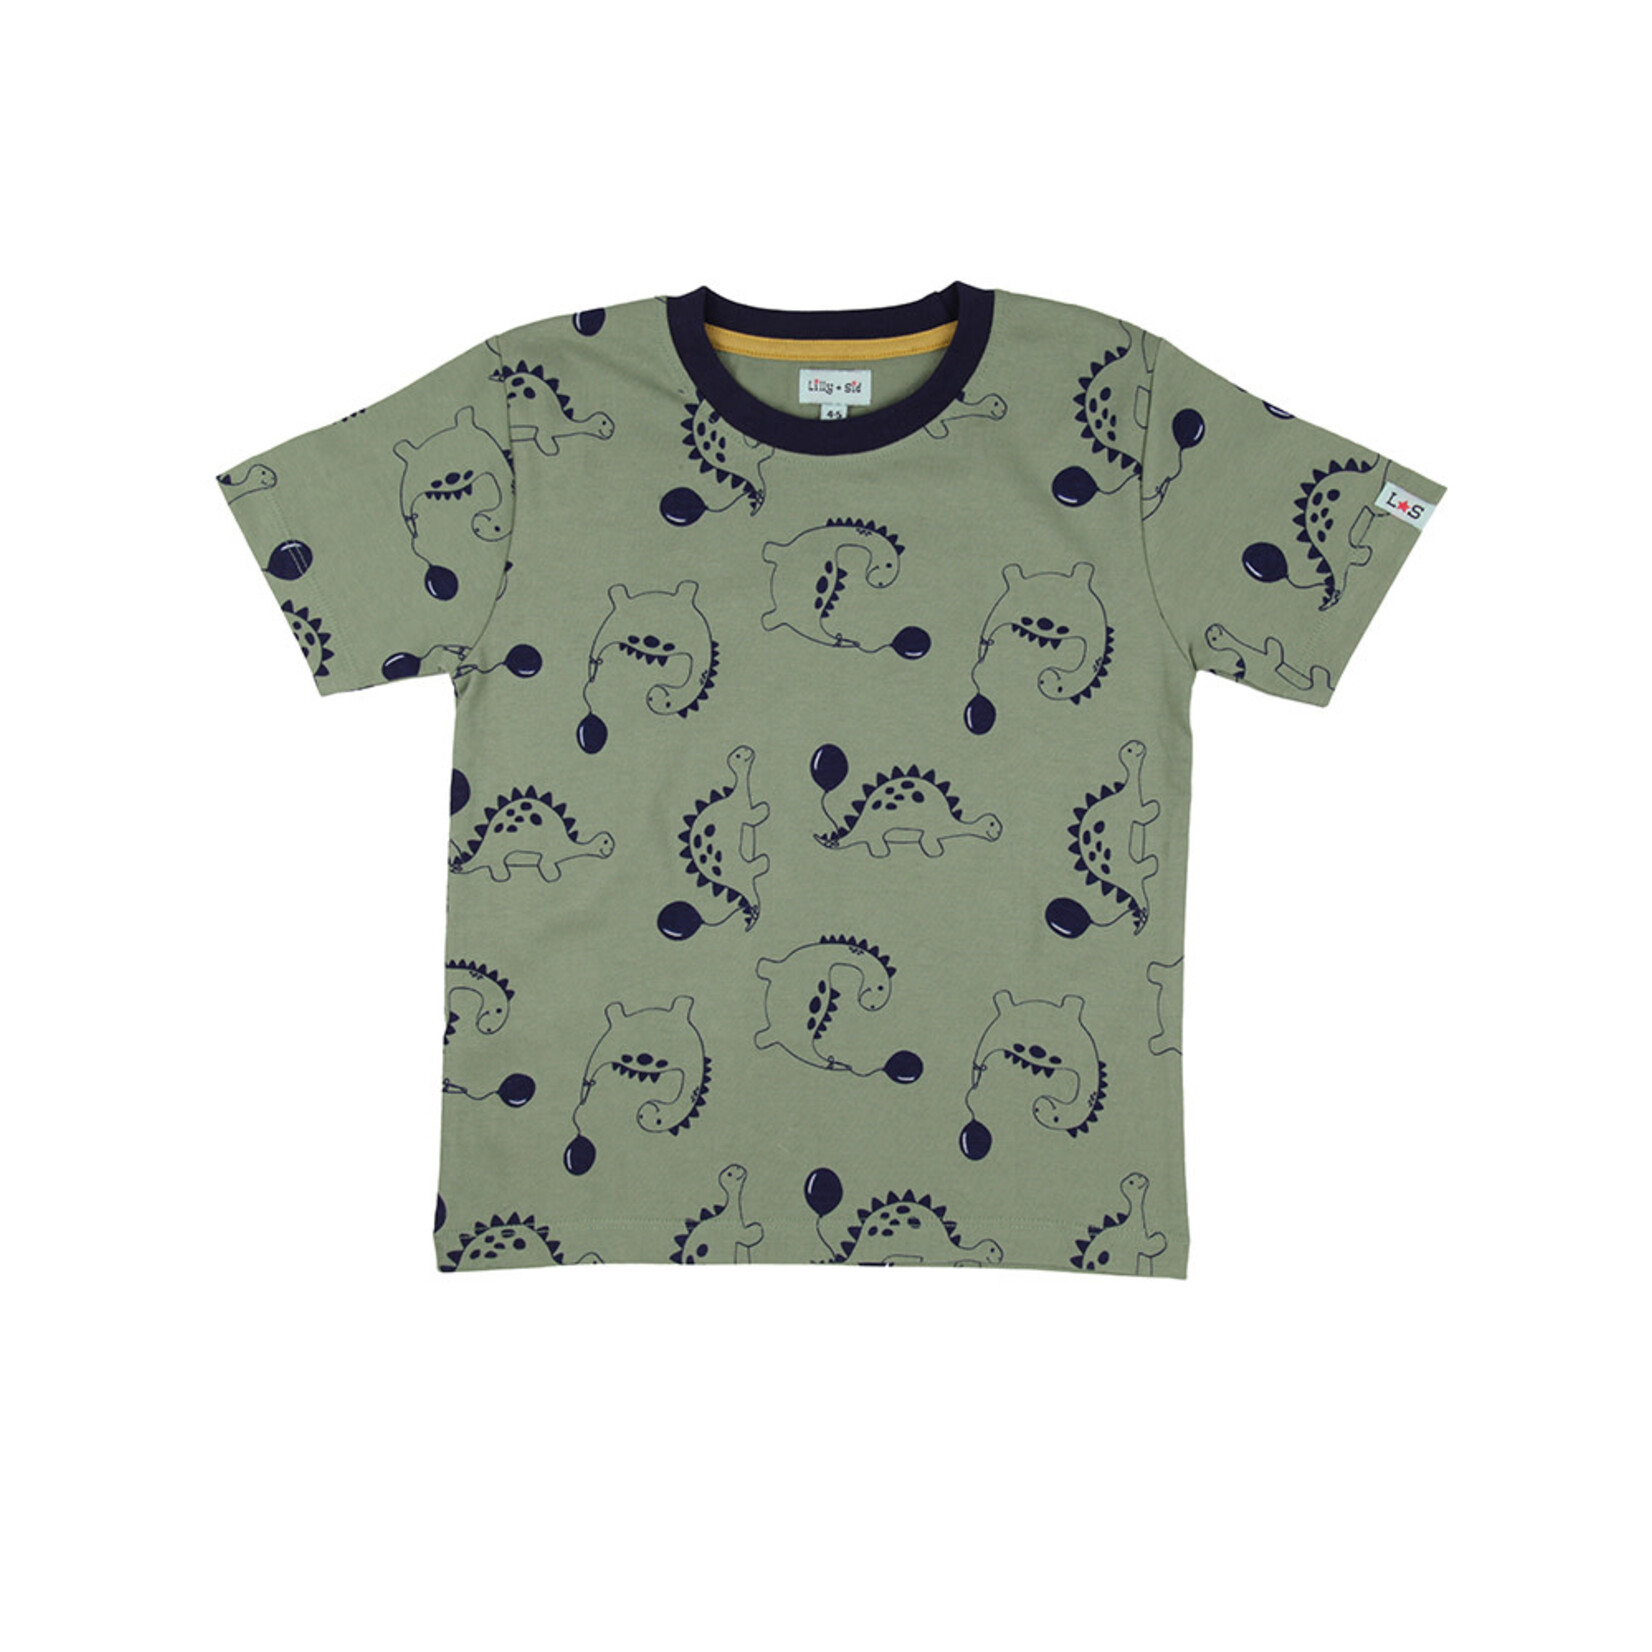 Lilly+Sid  LILLY+SID - Pack of 2 T-Shirts - Dino Print on Green Background and Navy Stripes with Yellow Pocket